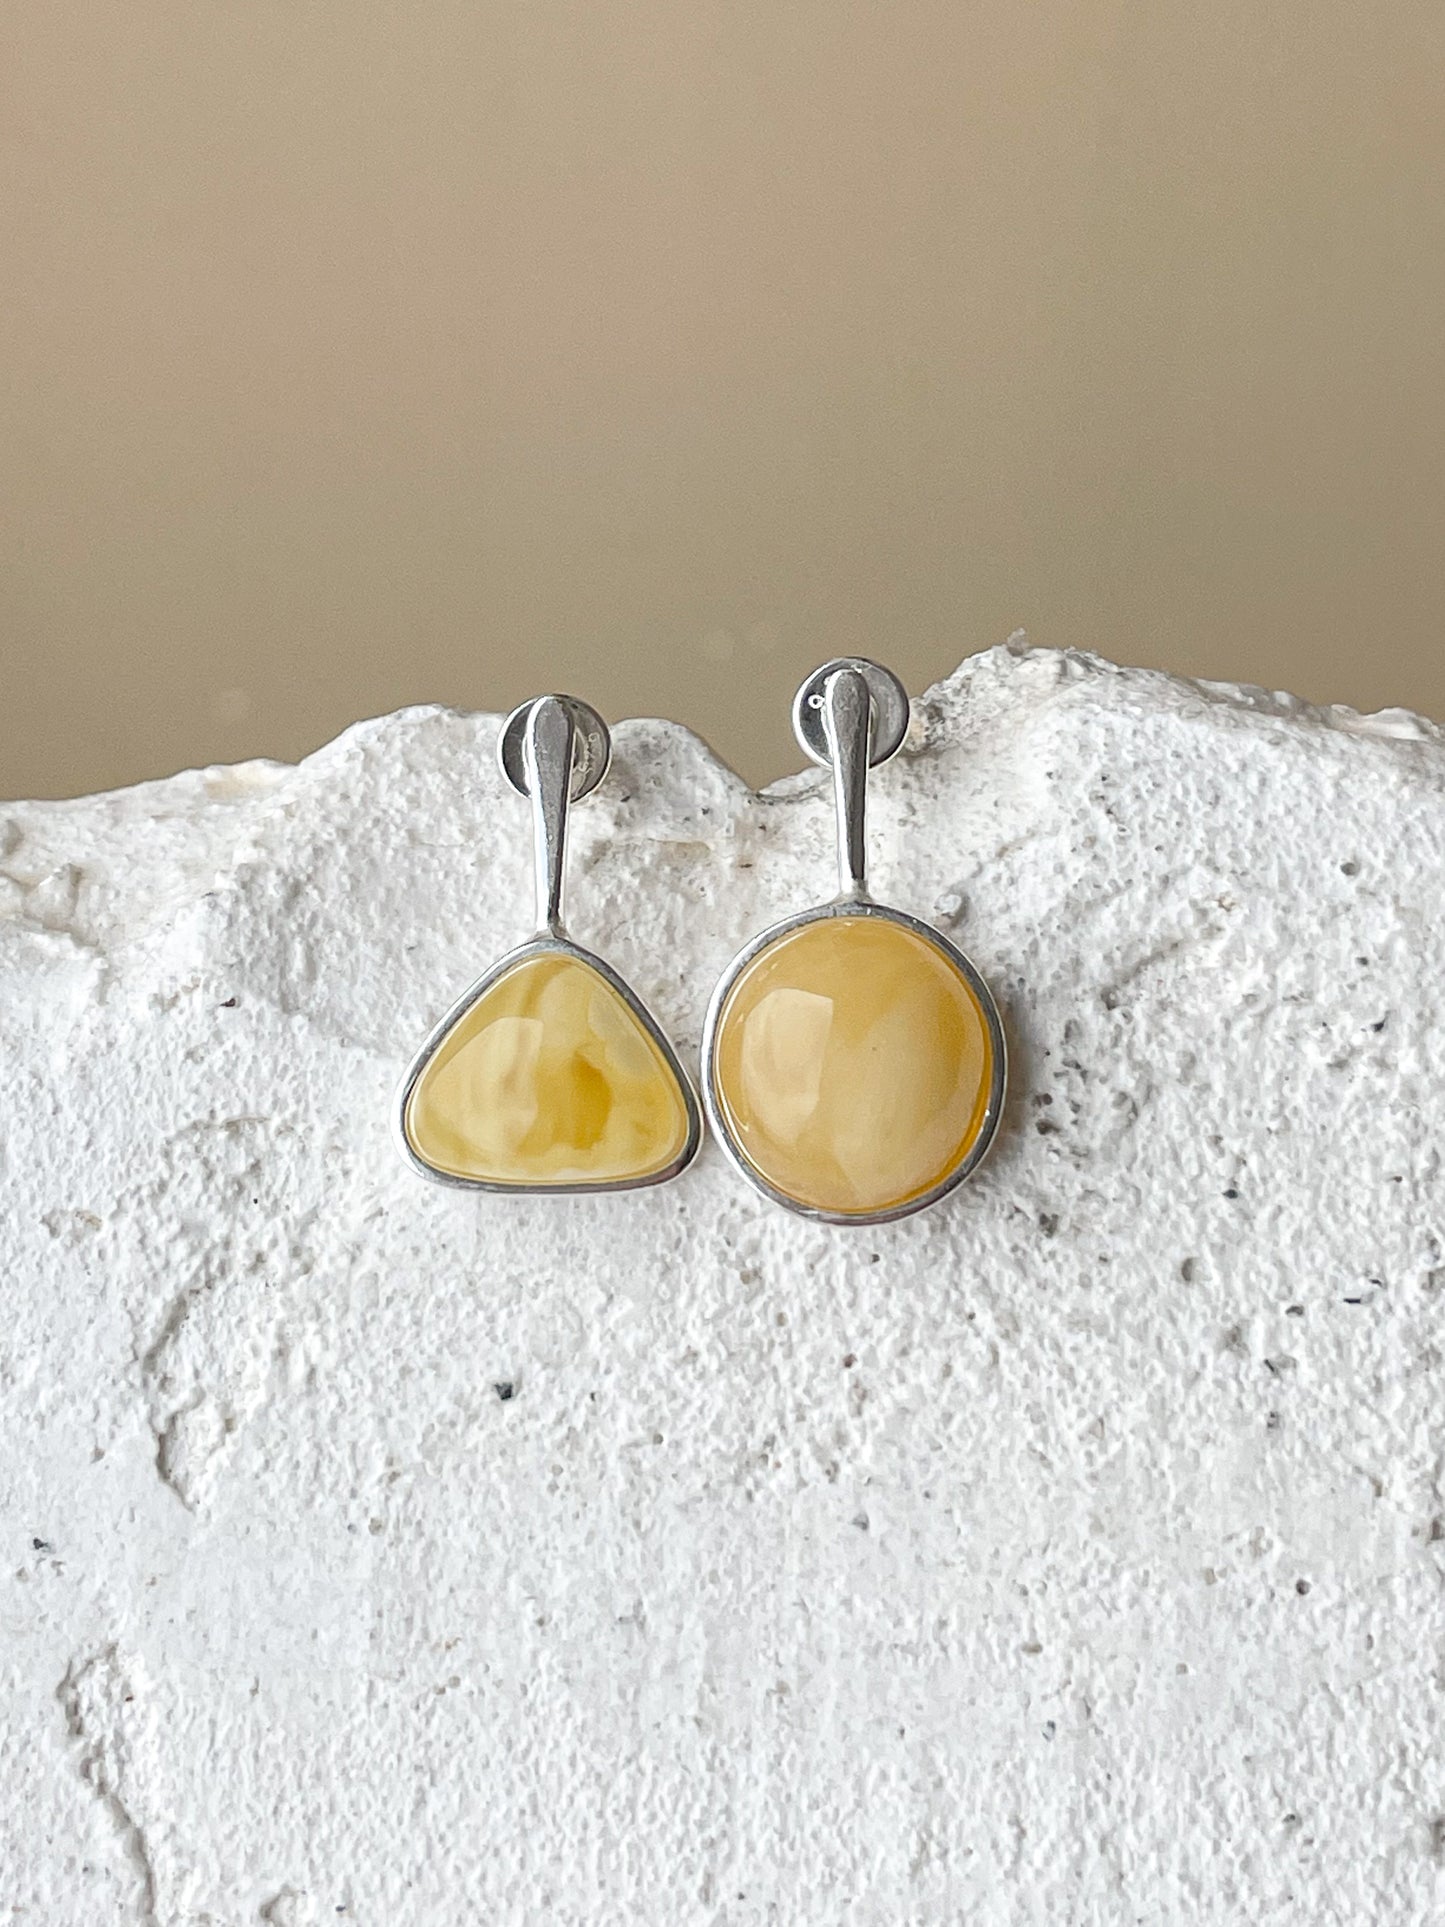 Matte amber stud earrings - Sterling silver - Mismatched earrings collection